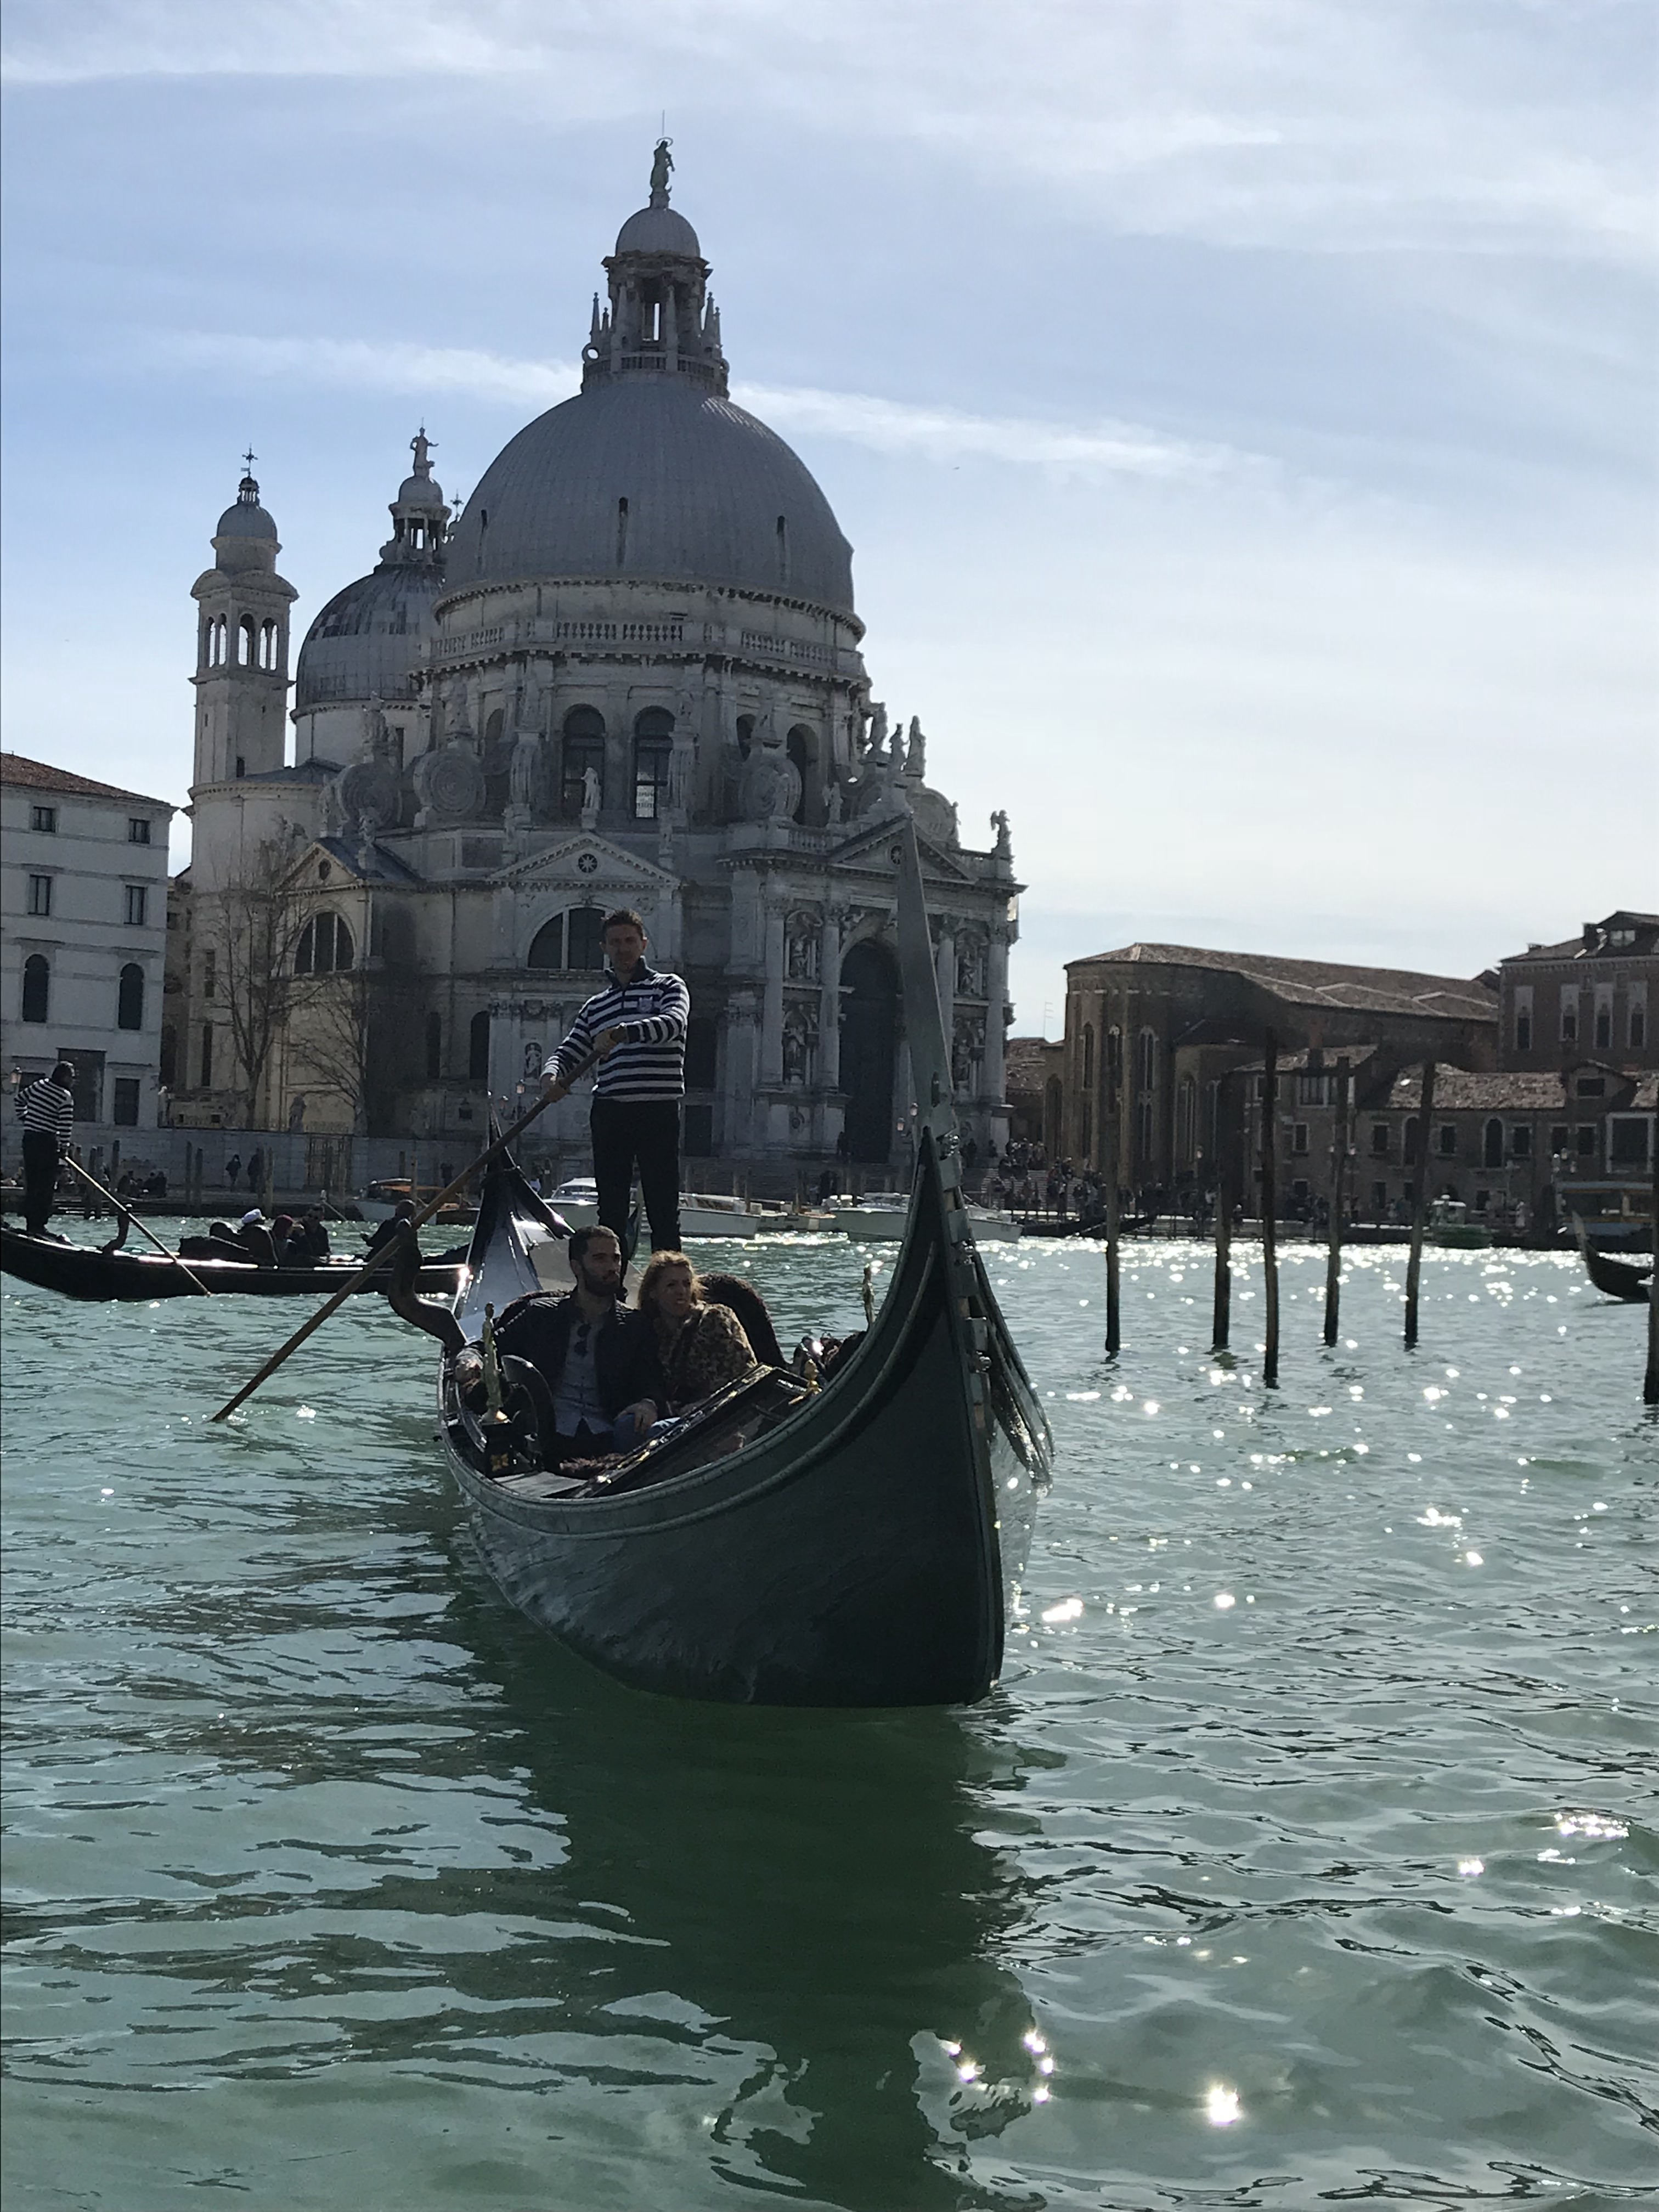 Gondolier on the Grand Canal in Venice